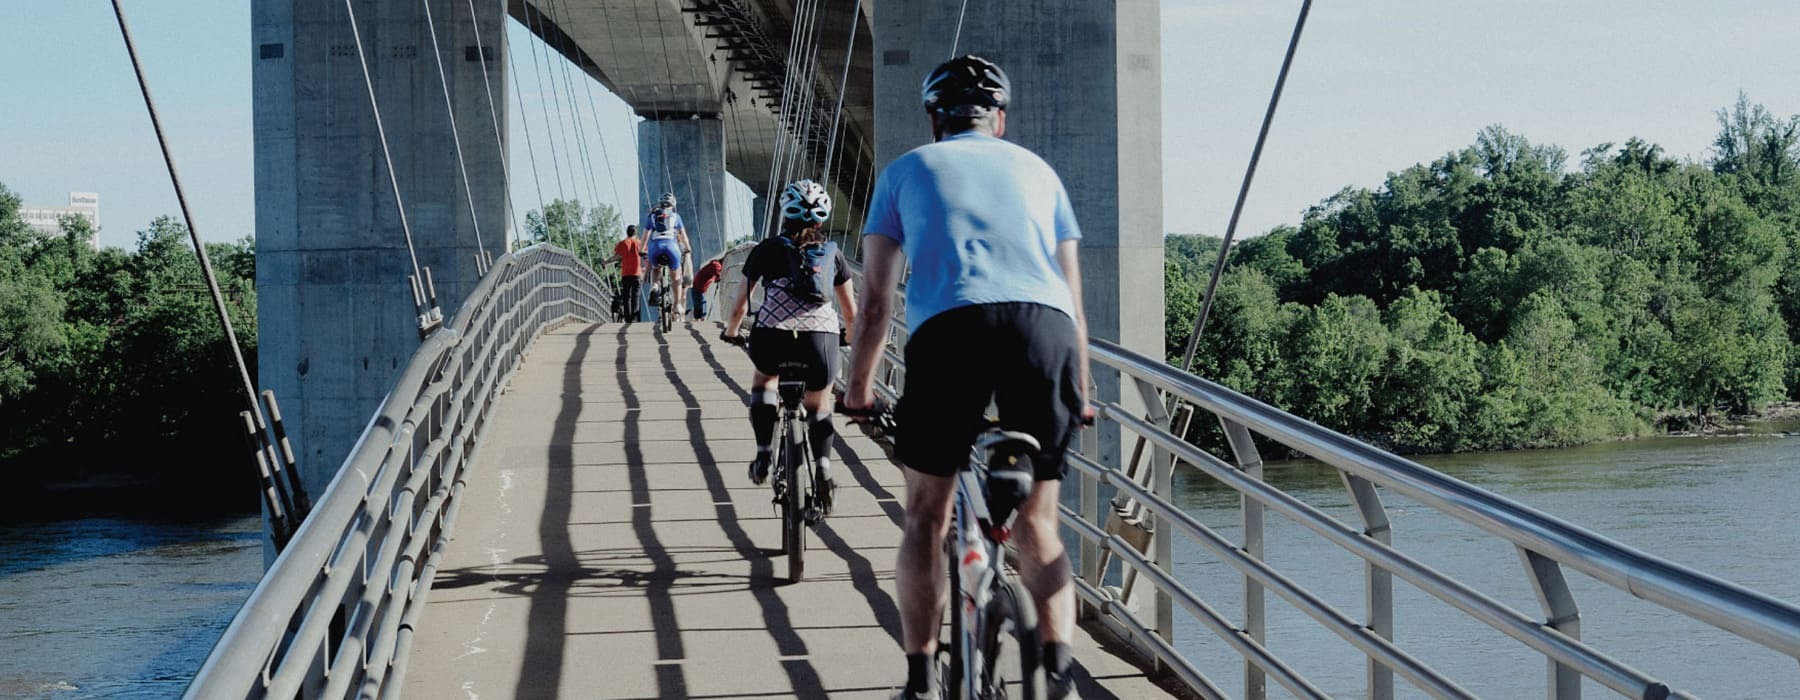 lifestyle image of people riding across a bridge on their bicycles